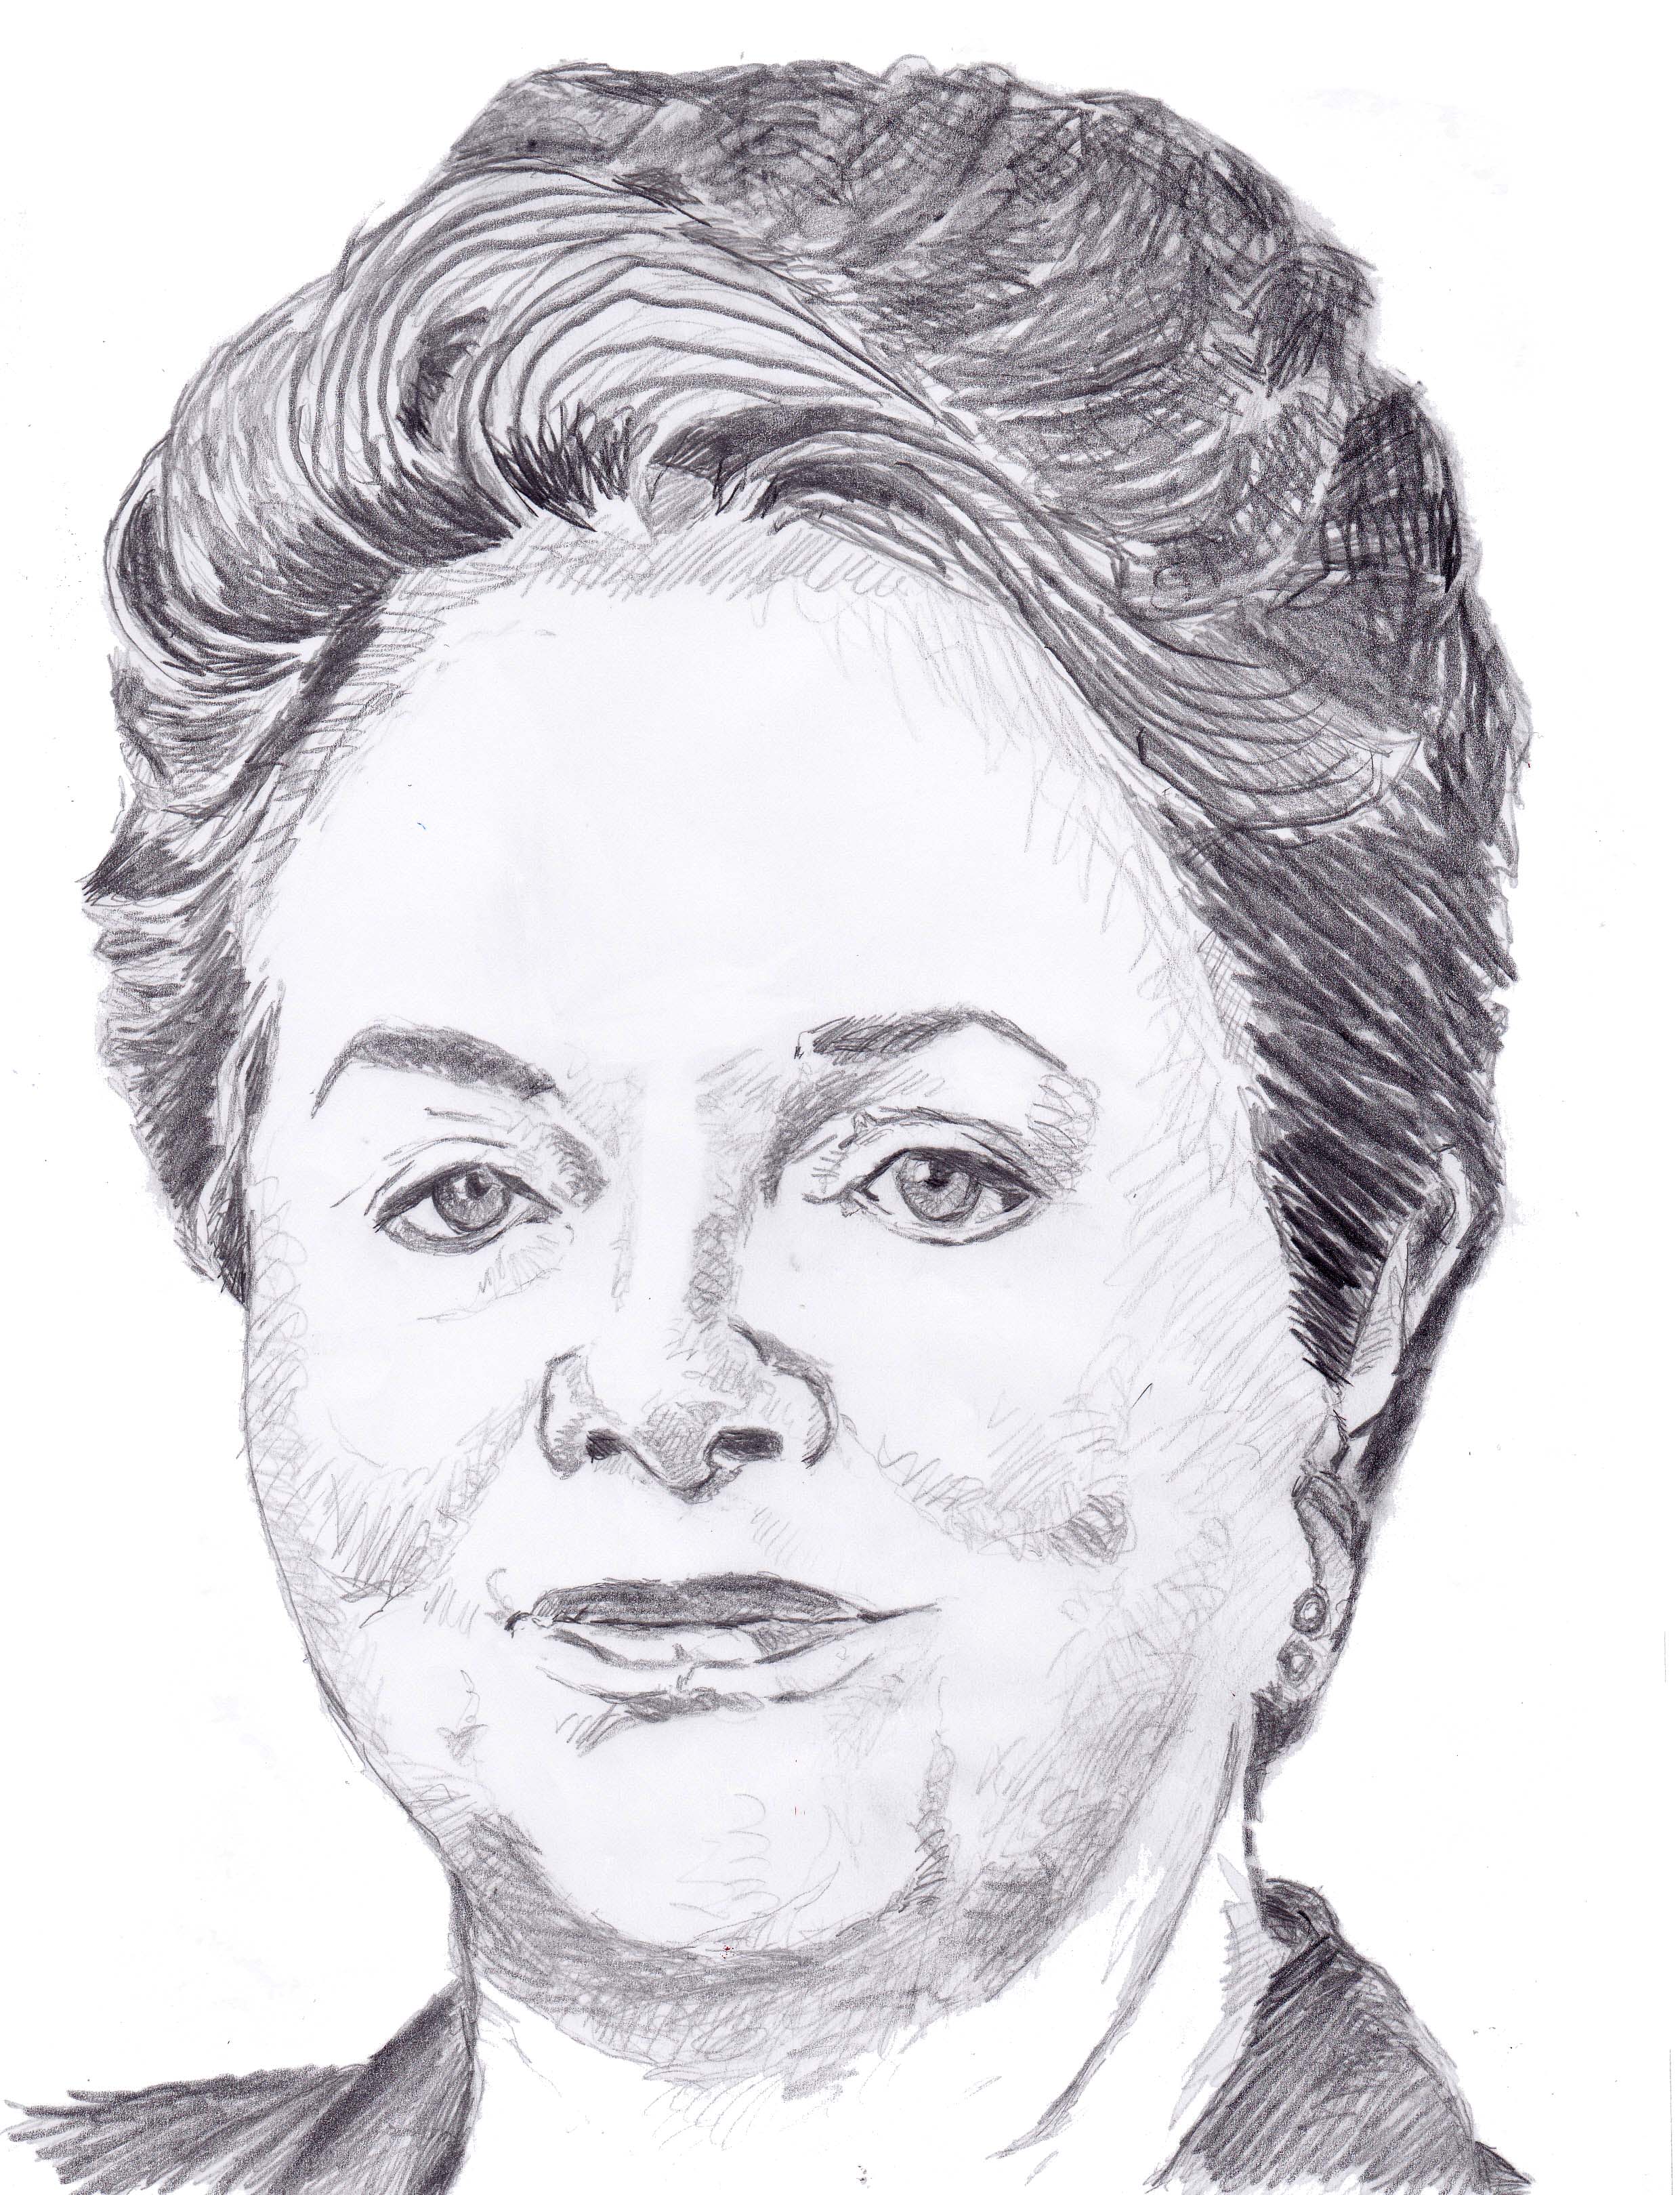 Dilma Rousseff. Crédit Muriel Epailly.